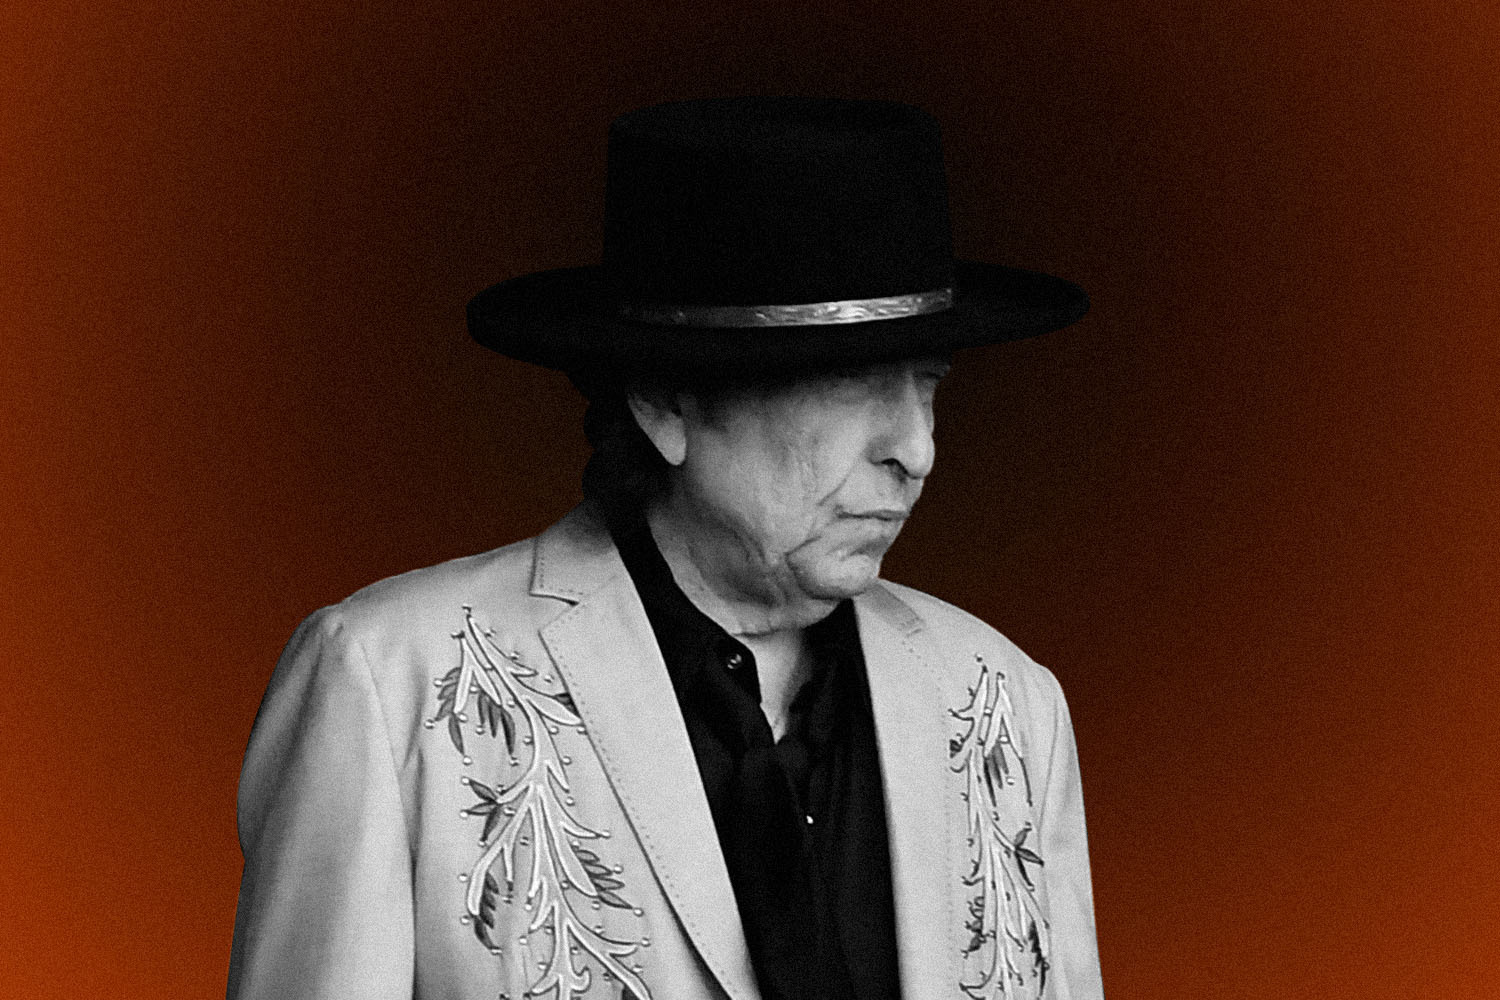 What Should We Expect From a New Bob Dylan Album in 2020?